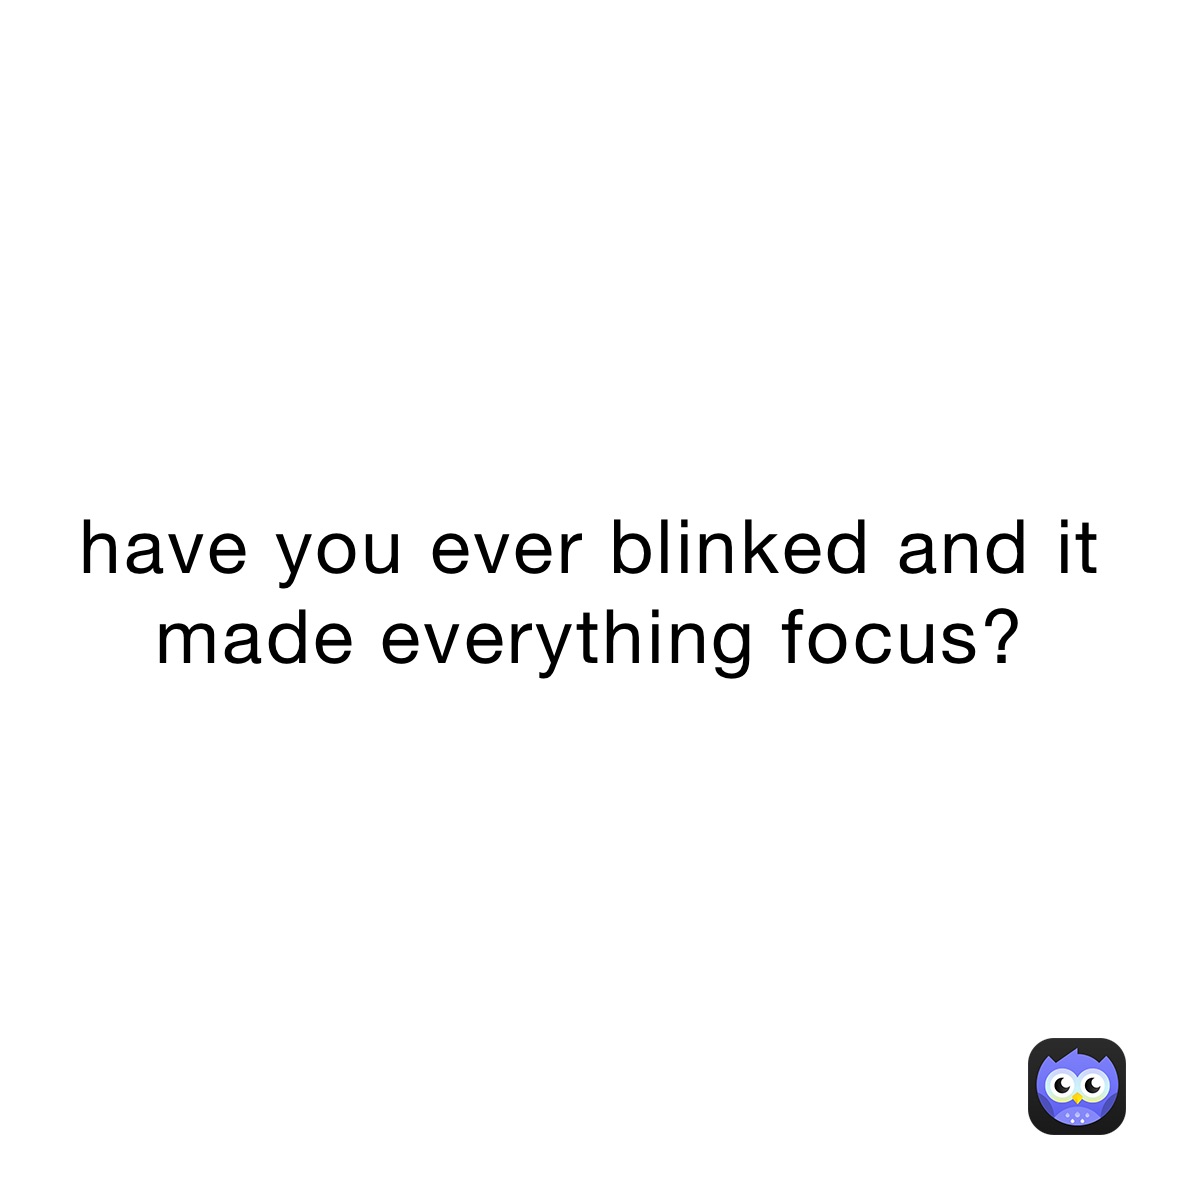 have you ever blinked and it made everything focus?